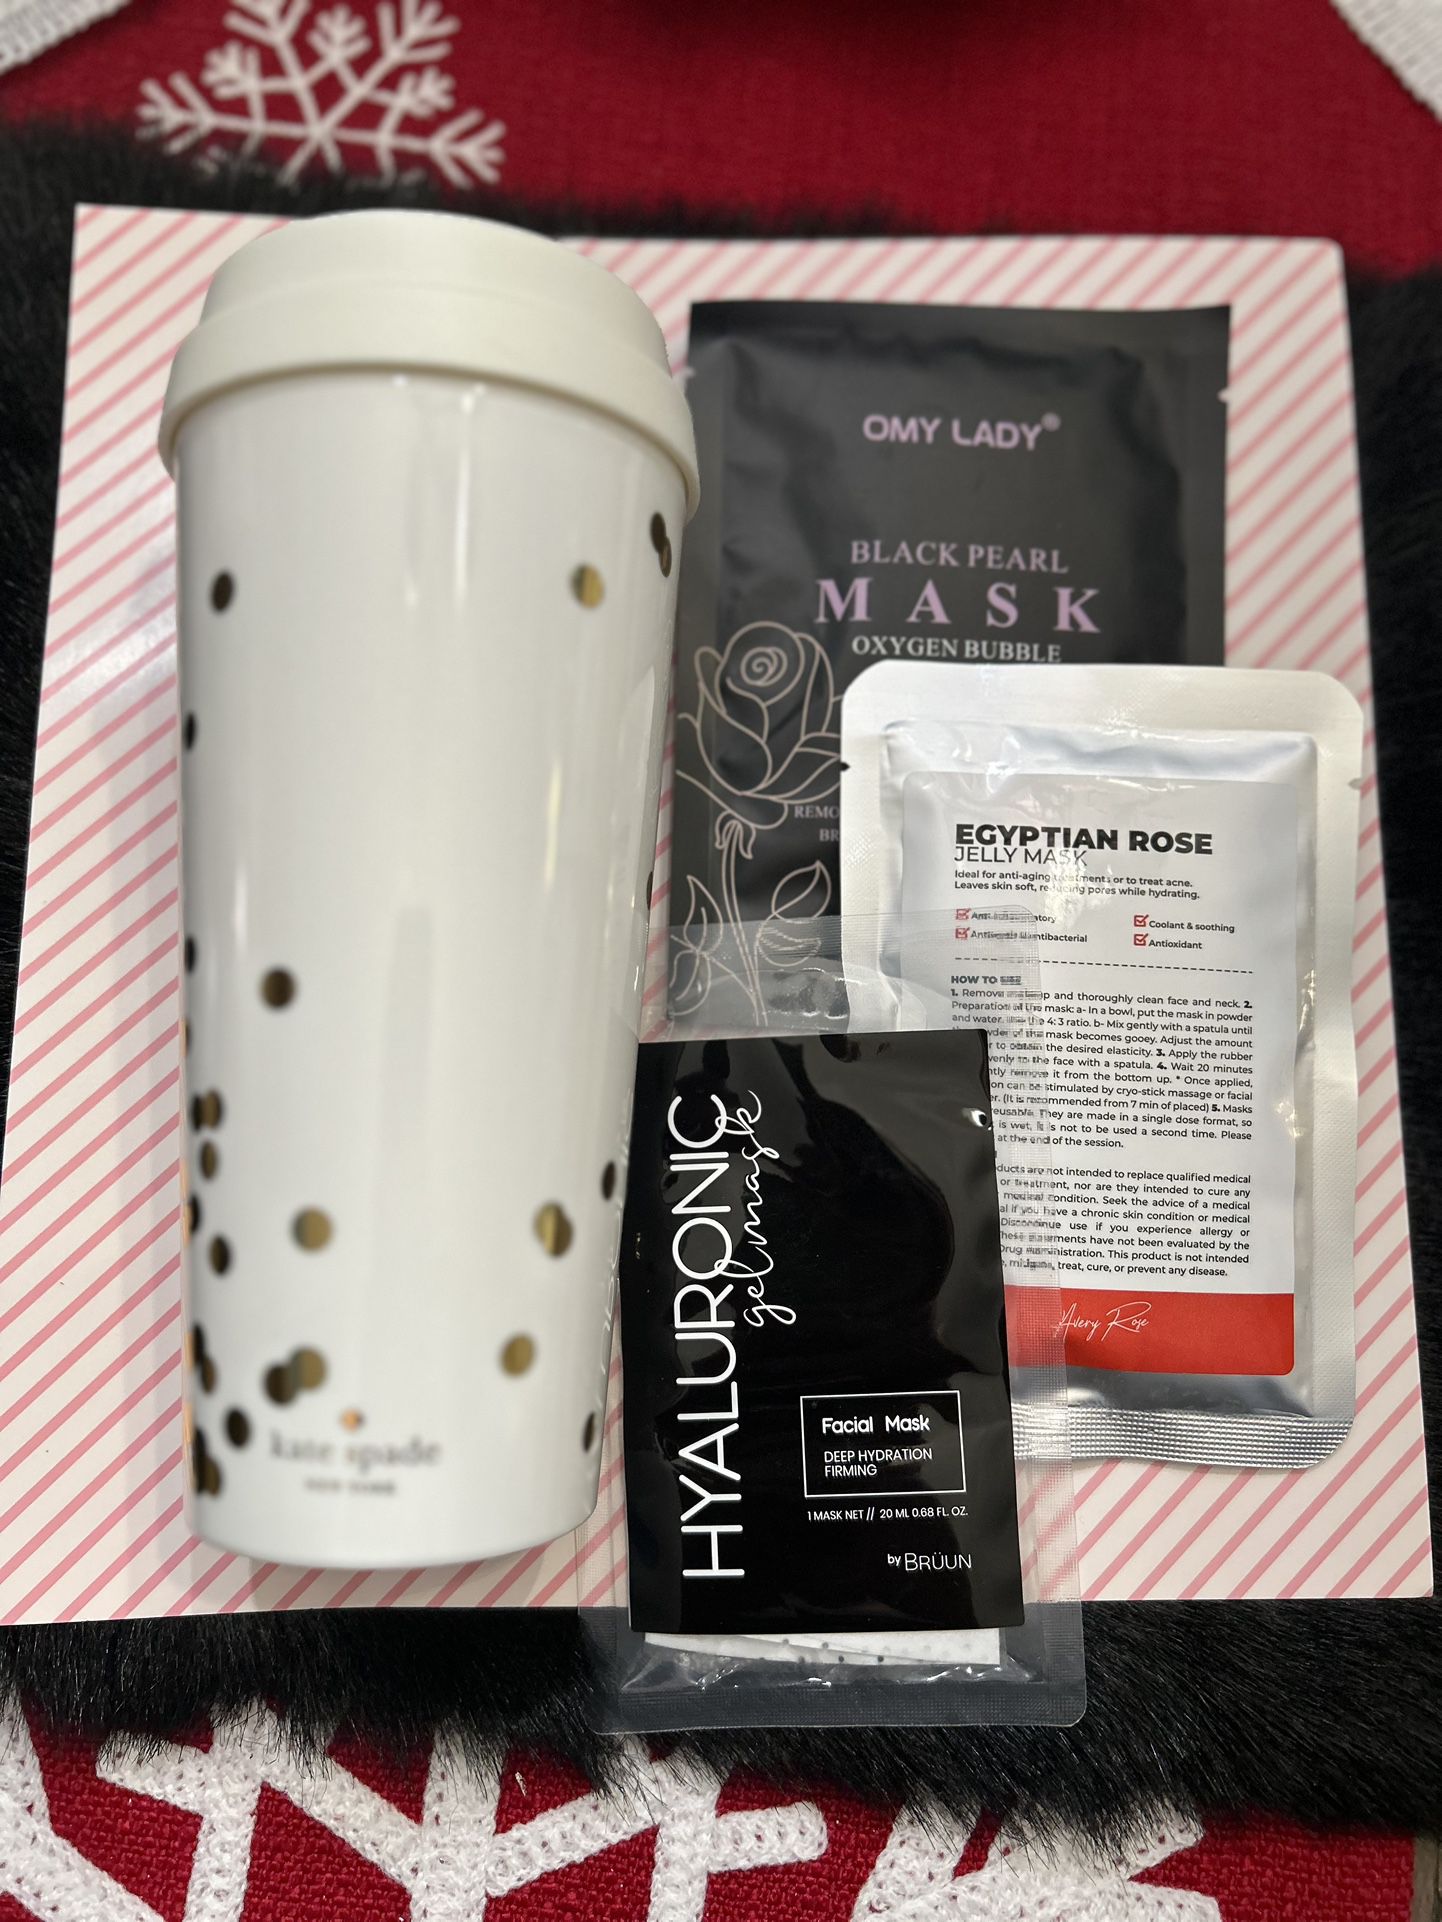 Kate spade cup with face masks 